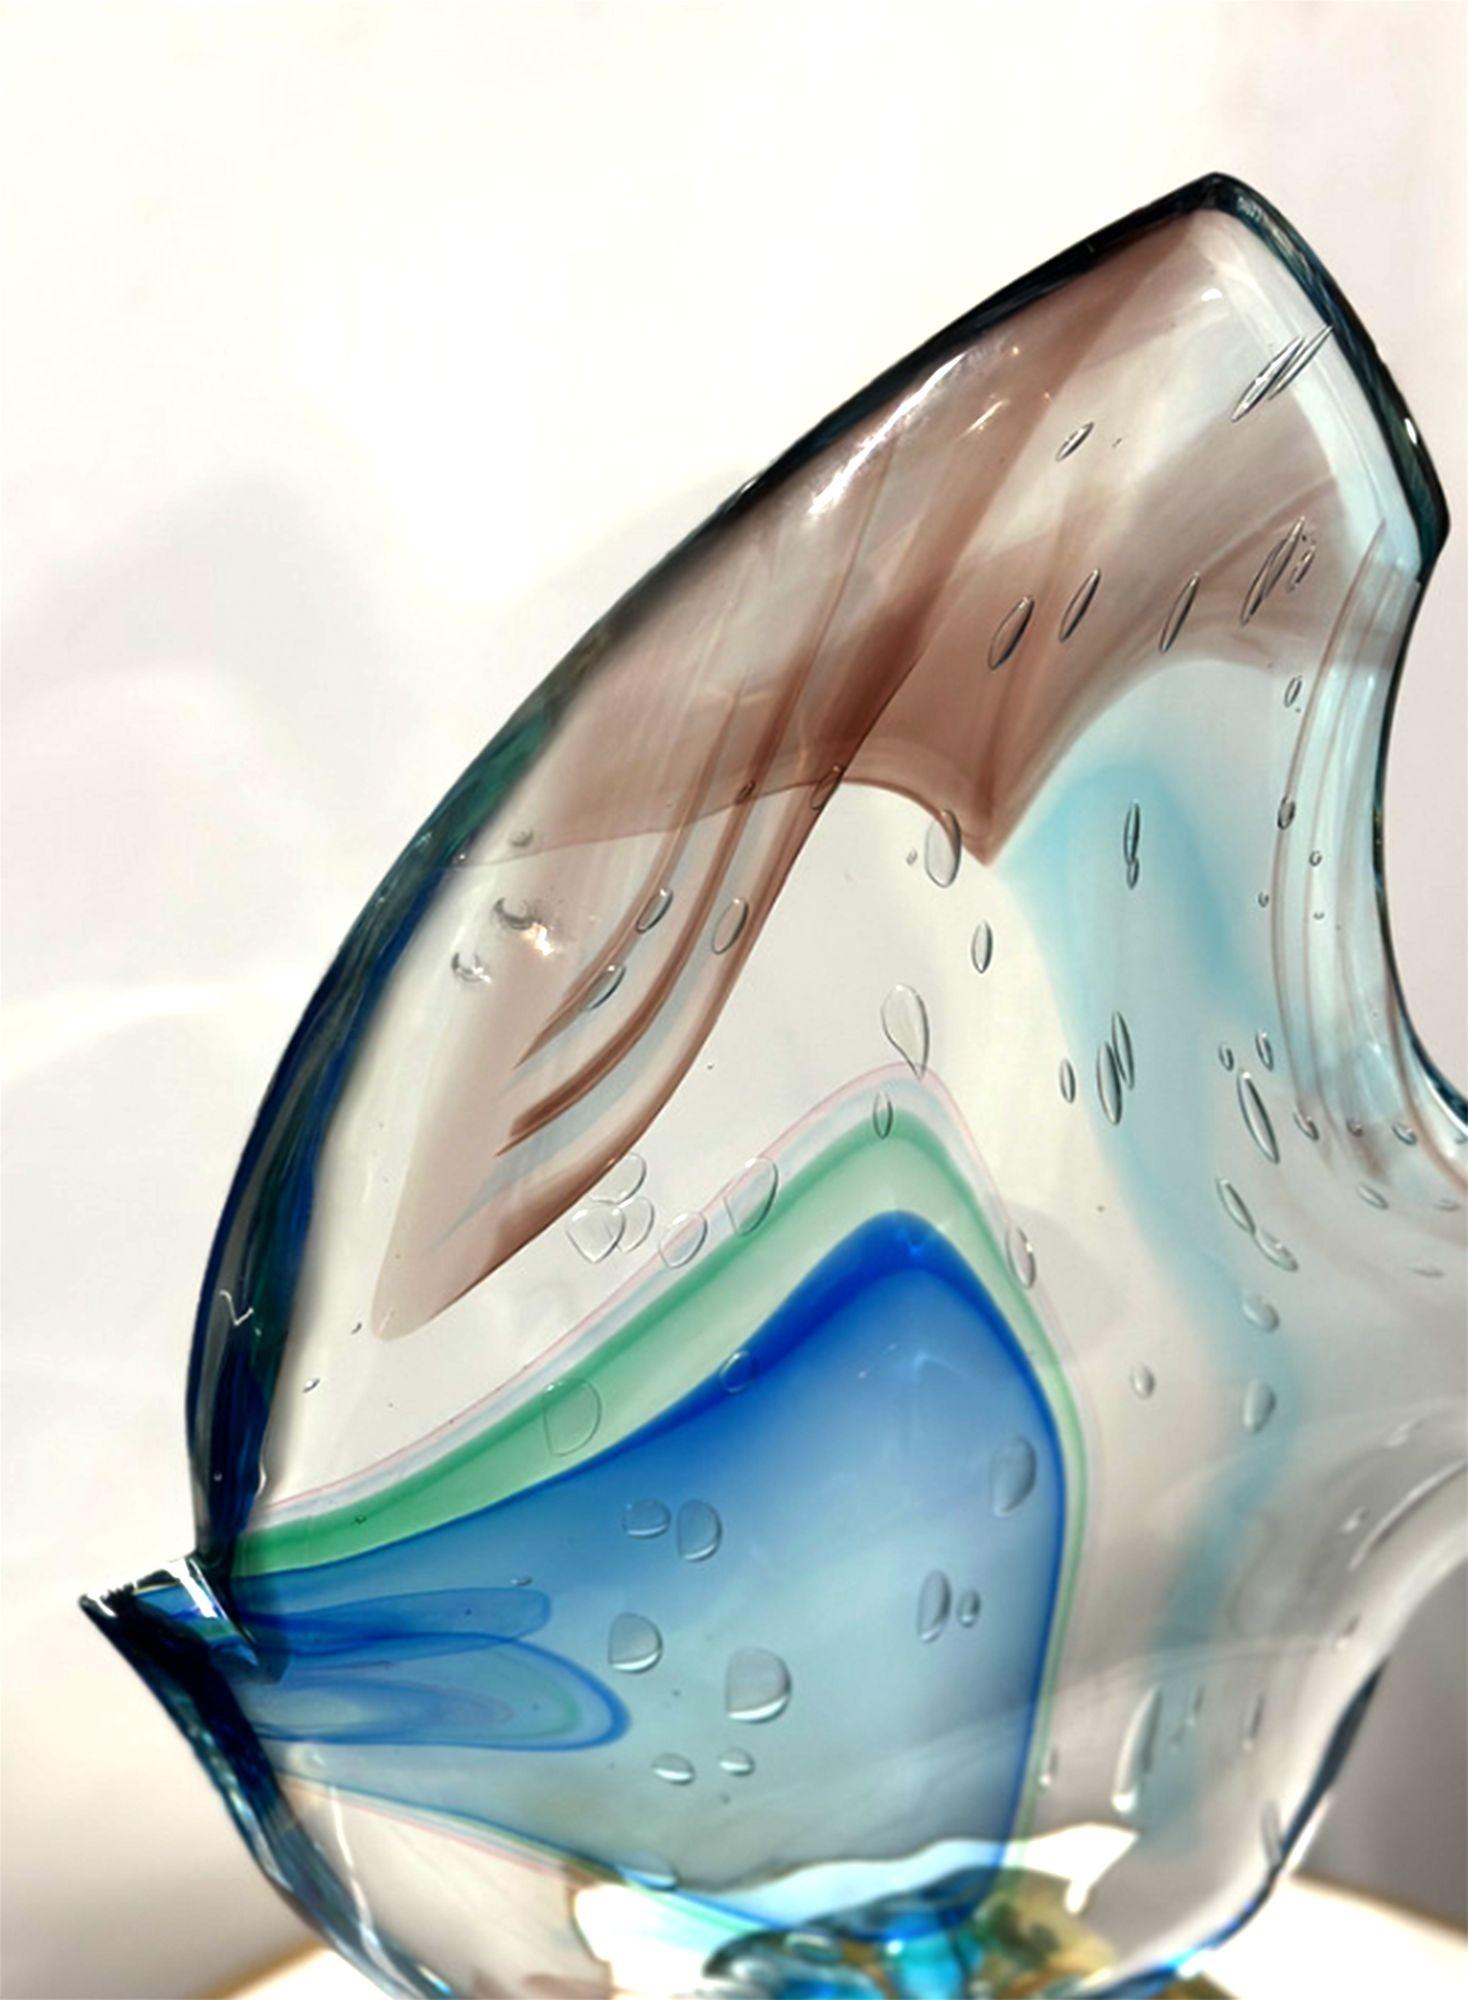 Abstract fish sculpture by Sergio Costantini for Vetro Artistico Murano with, blue, yellow and brown accents on clear Murano glass. Made in Italy, 20th century. Includes the artist's signature and 